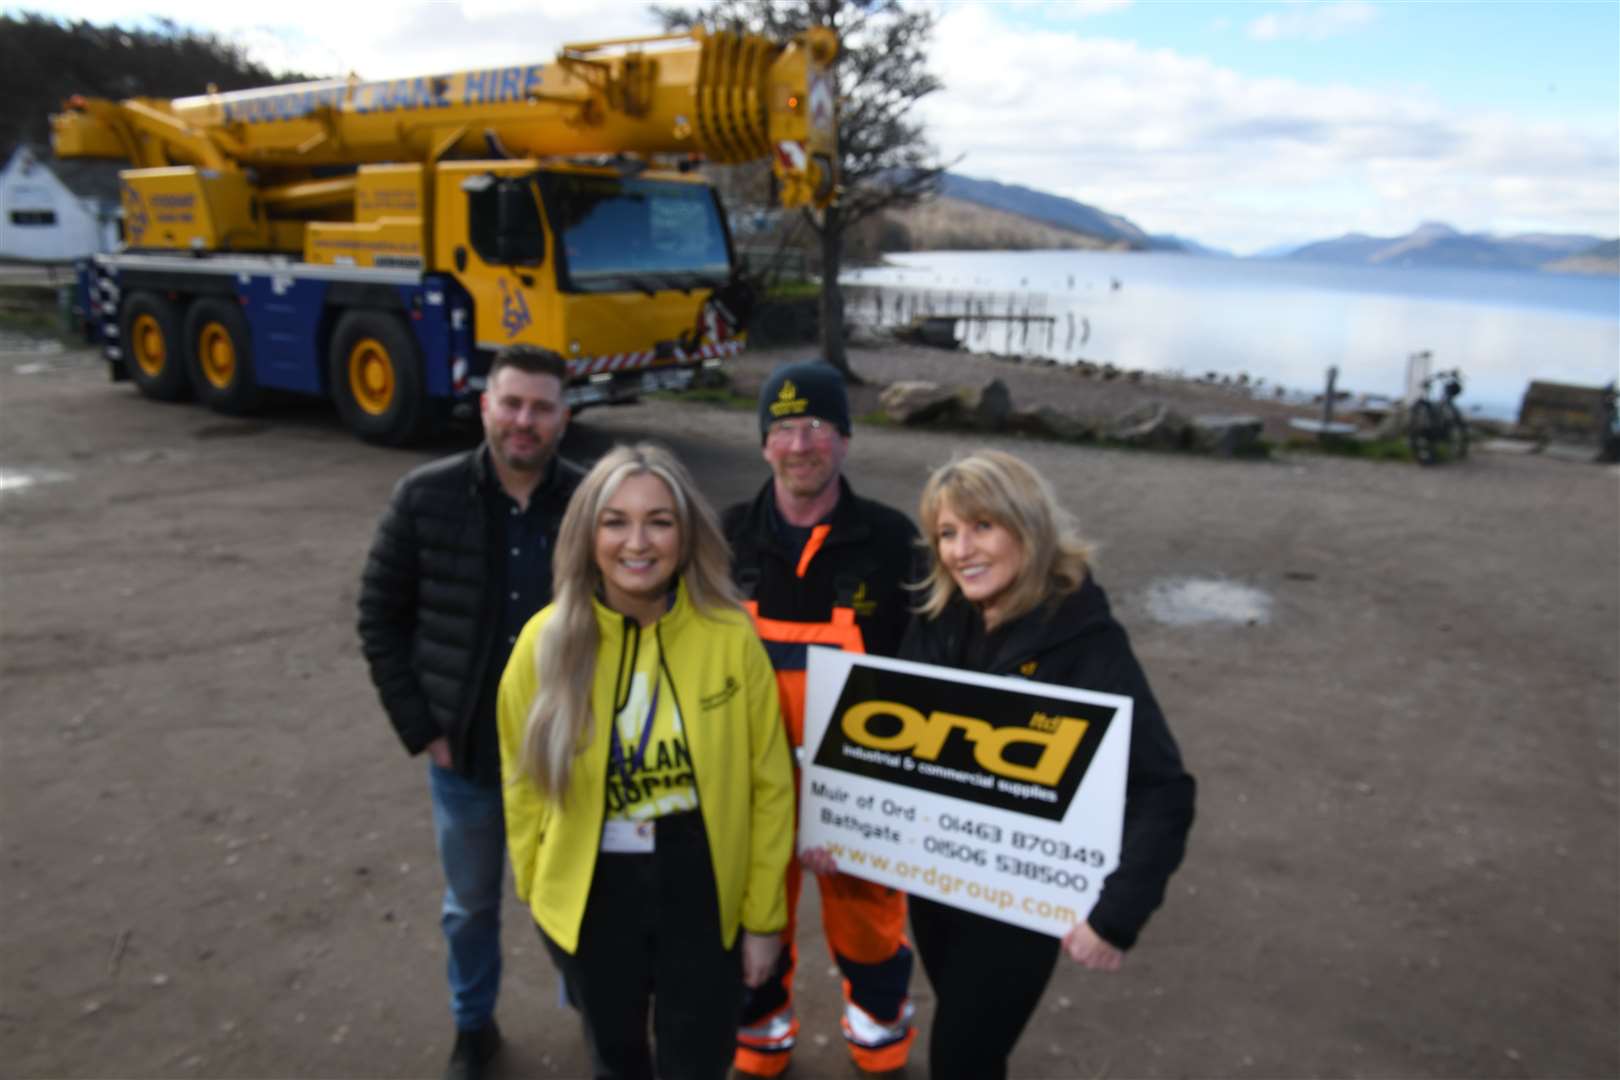 Ewan Bruce, Alba Traffic Management Contracts Manager, Emma Nicol, Highland Hospice Fundraiser, David Stoddart, Owner of Stoddart Crane Hire and Julie Henderson, Ord Group Business Development Manager. Picture: James Mackenzie.